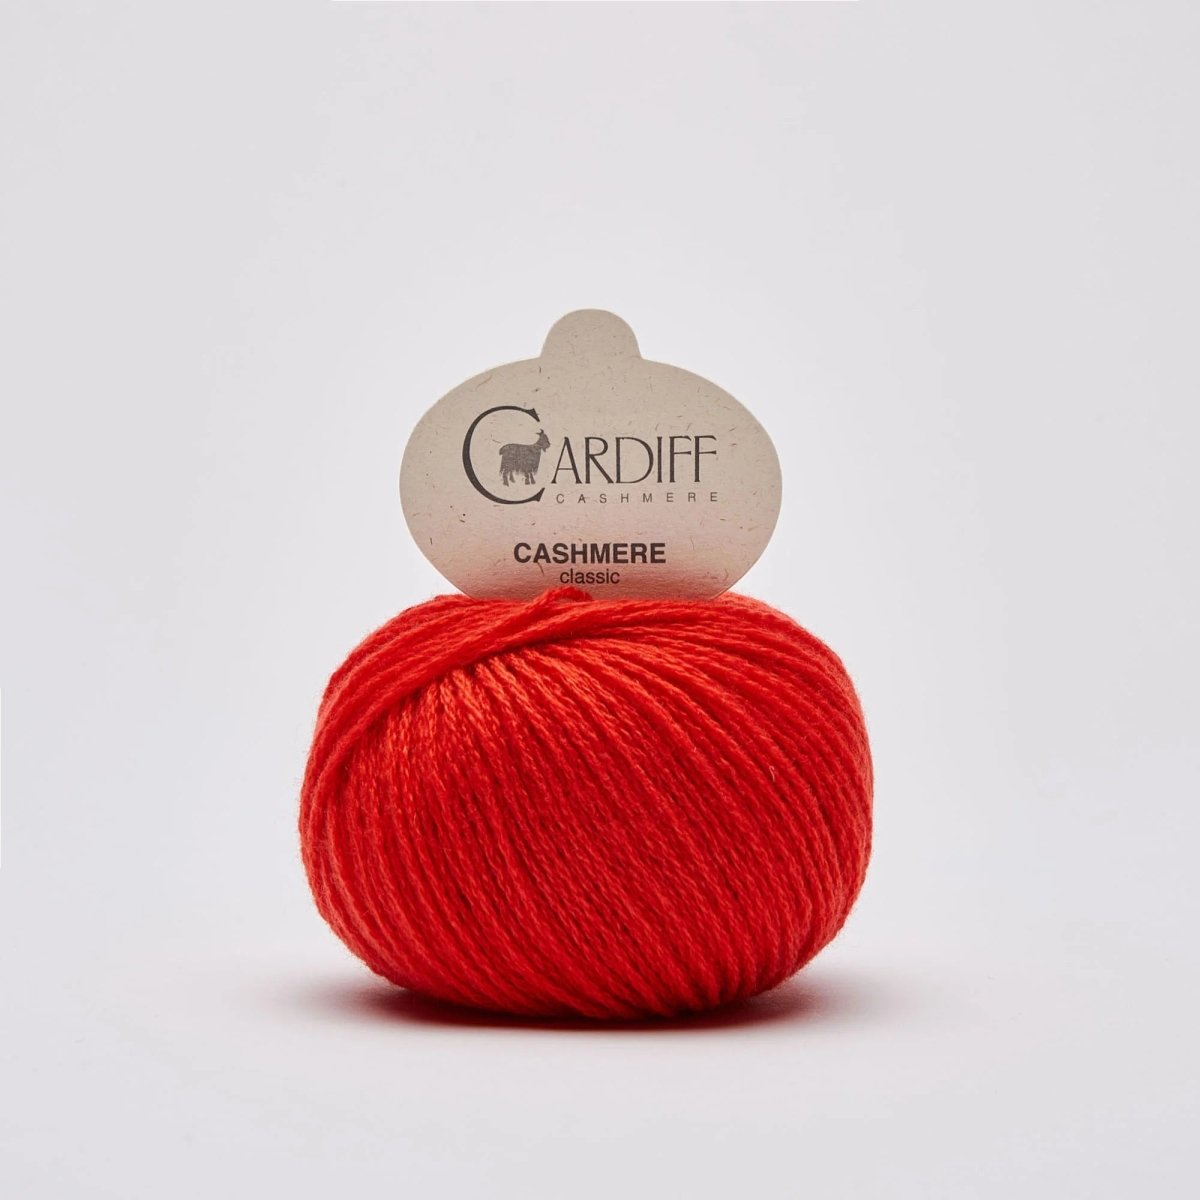 CASHMERE CLASSIC 517-Hermes - Cardiff Cashmere